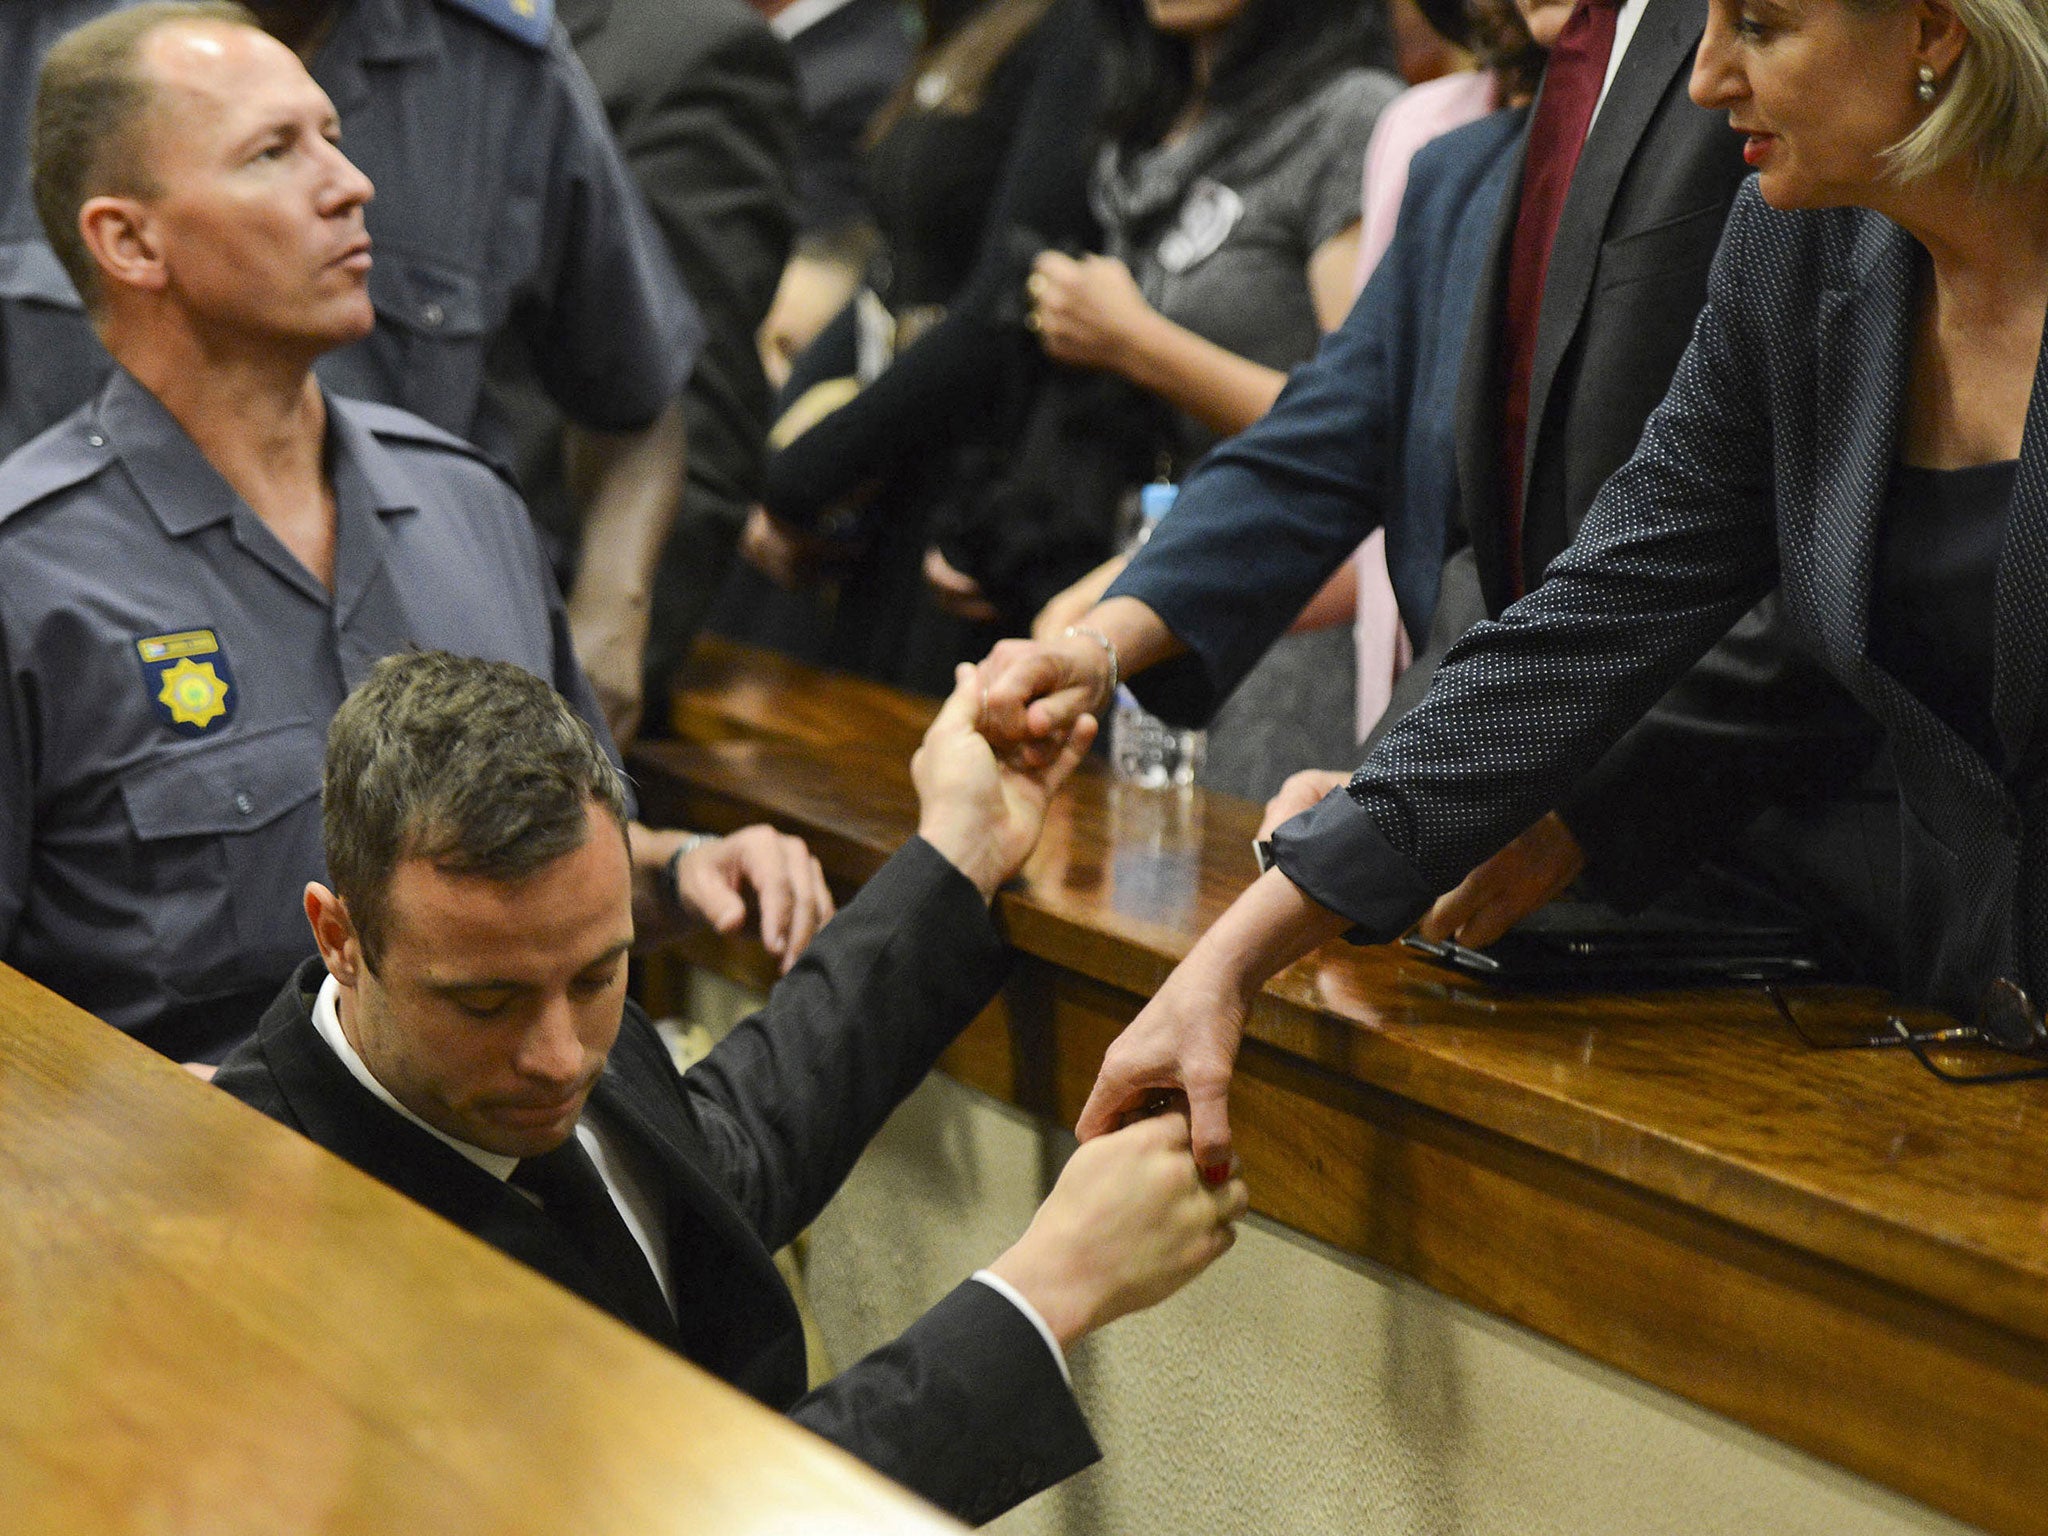 Oscar Pistorius touches hands with family members as he is led down to the cells of the court in Pretoria, South Africa to serve a five-year prison sentence for culpable homicide